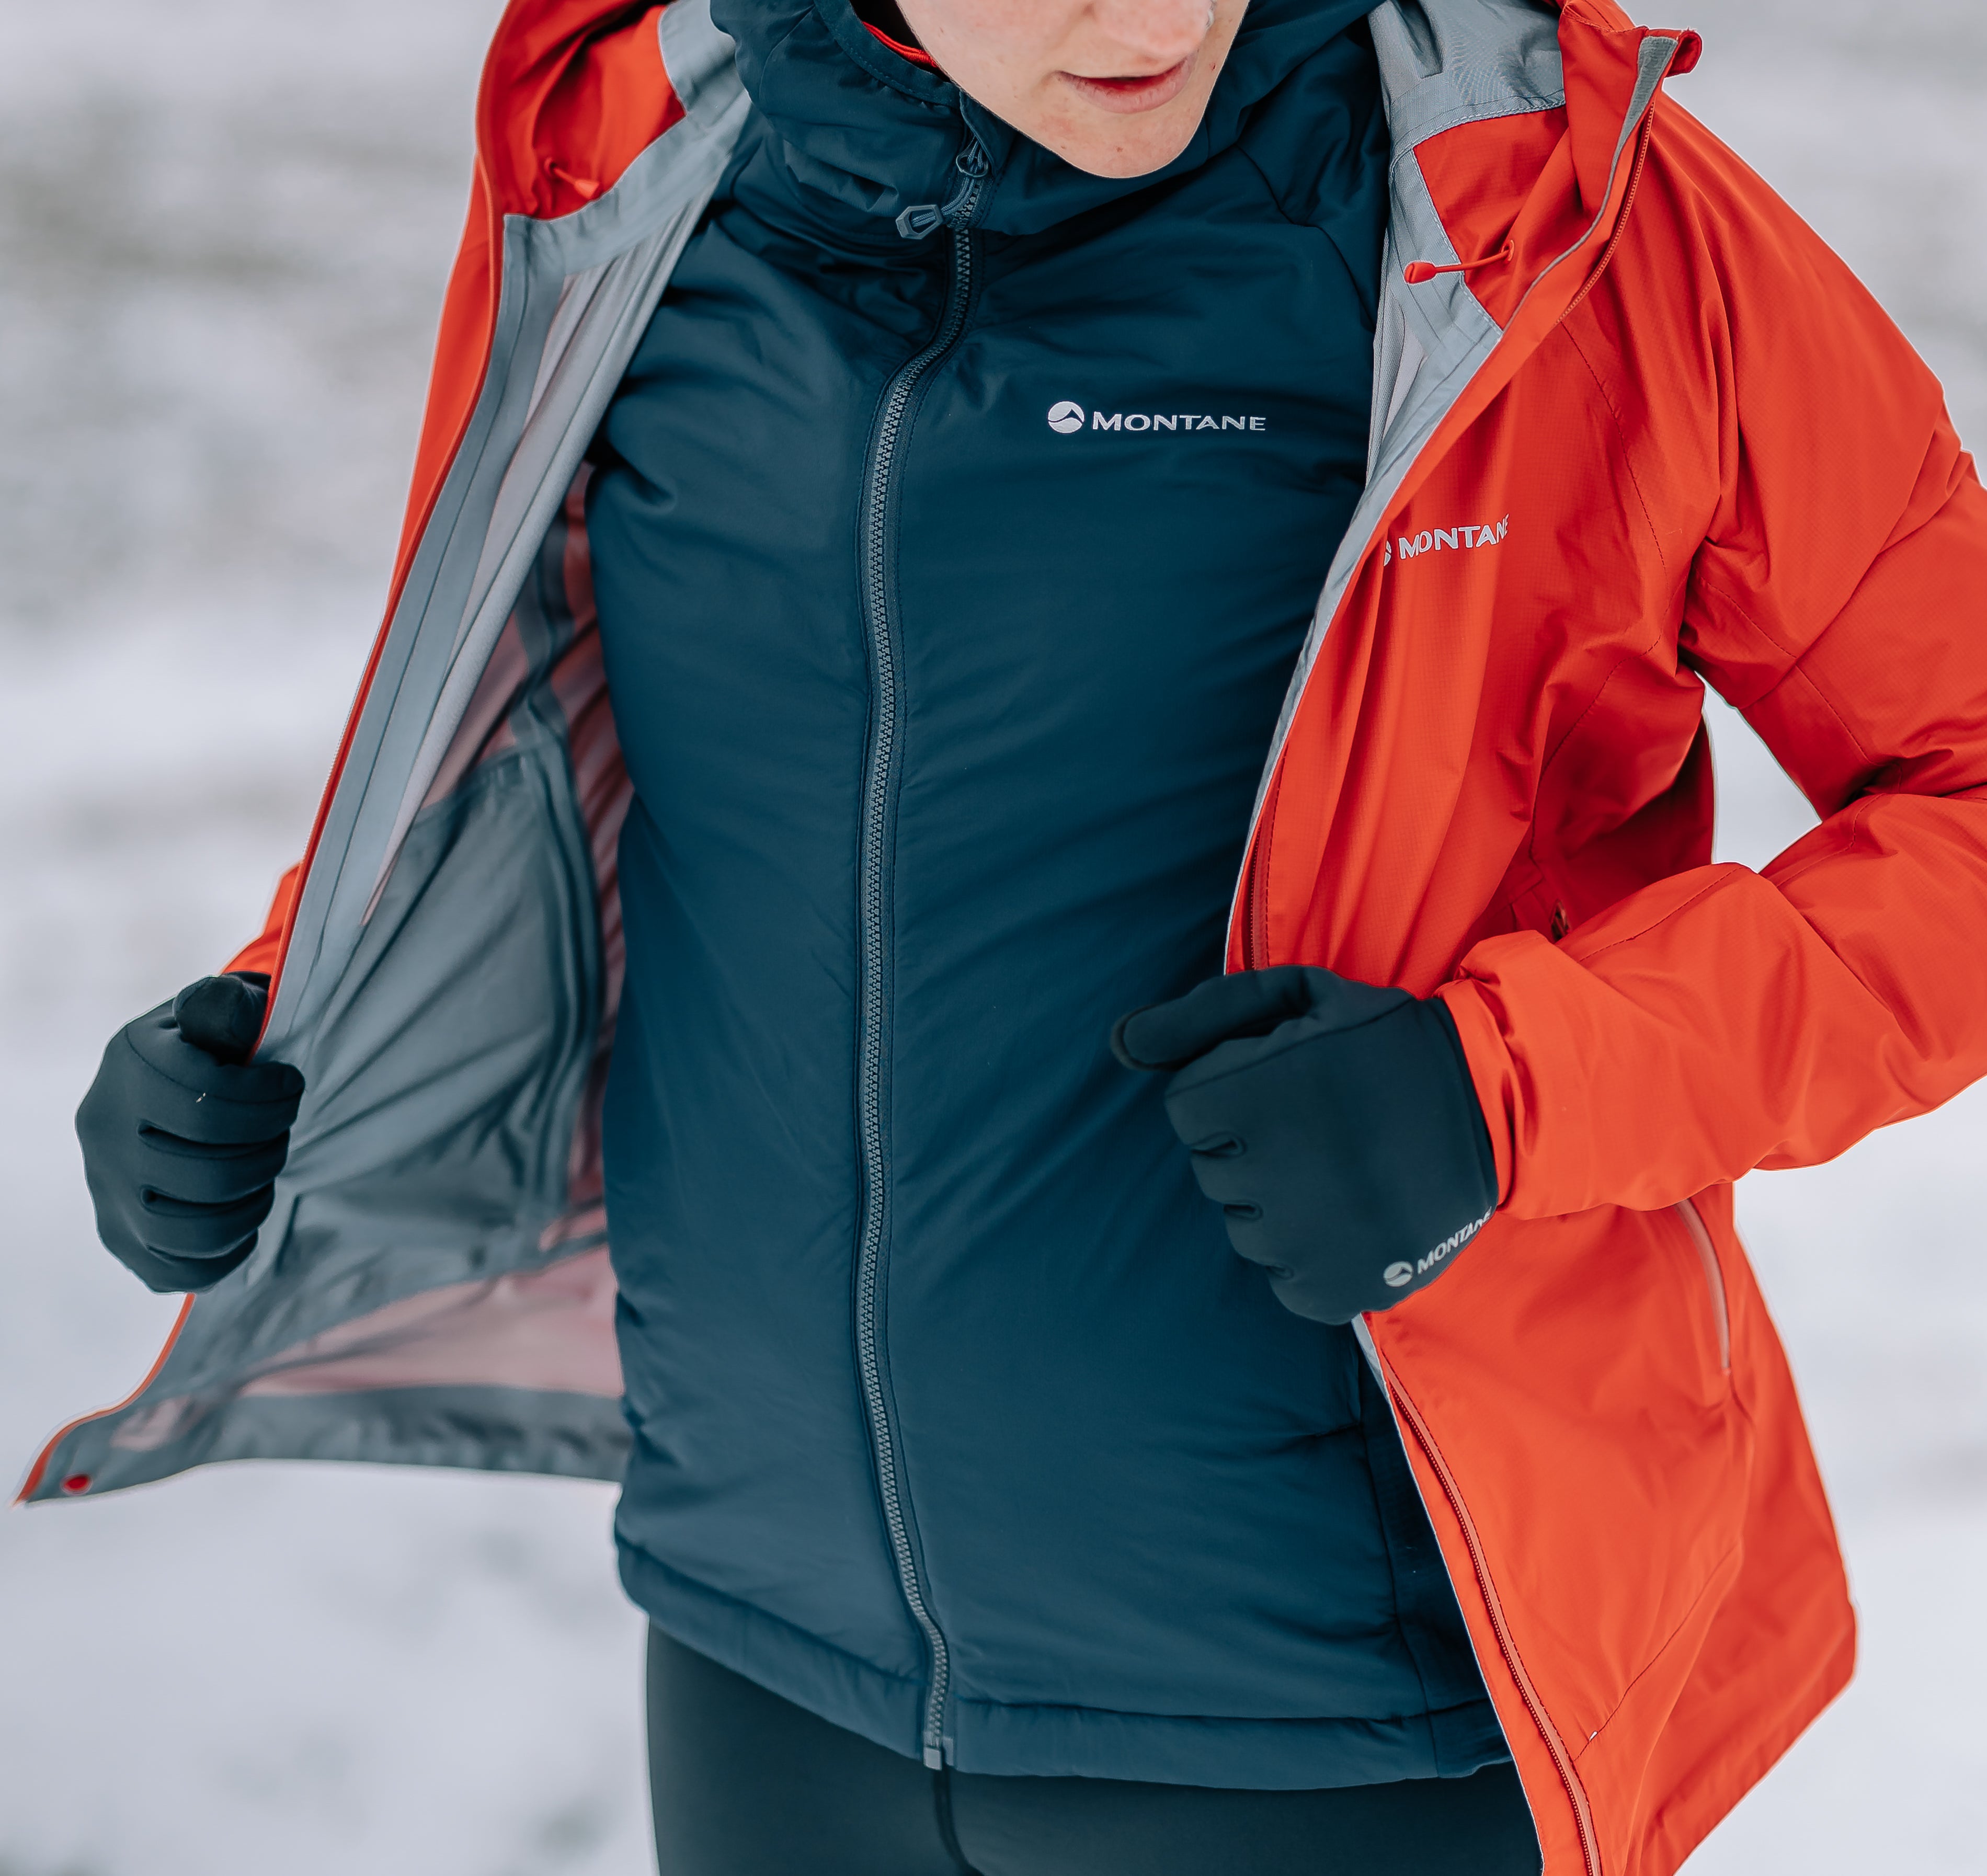 Outerwear for Women - Down Jackets, Coats and Vests